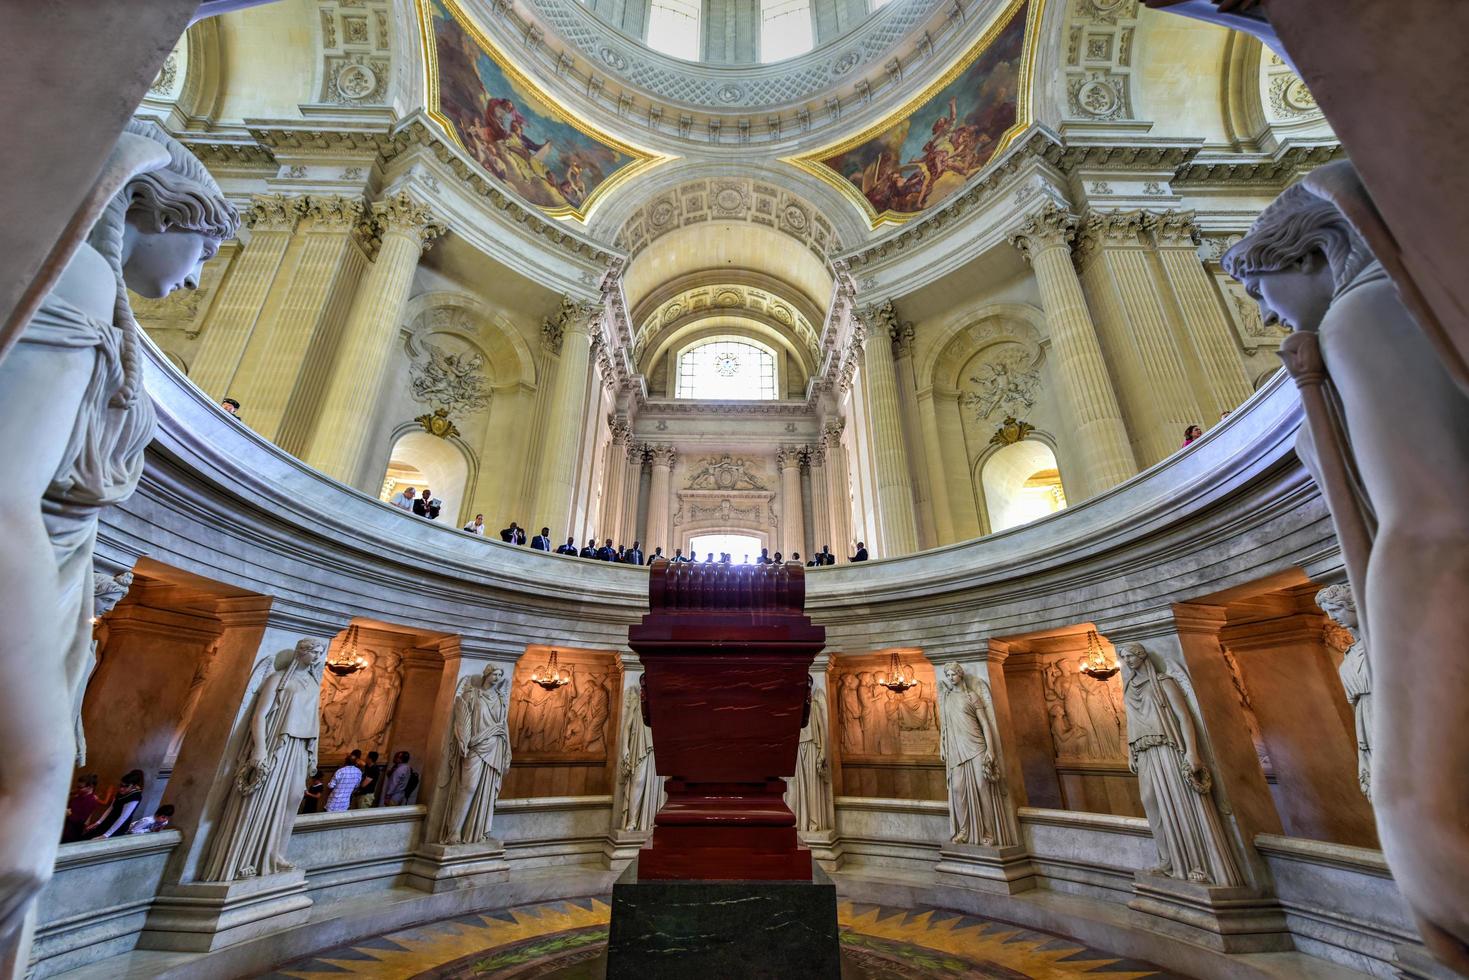 Paris, France - May 16, 2017 -  Napoleon tomb in the Musee de l'Armee  national military museum of France located at Les Invalides in the 7th arrondissement of Paris. photo